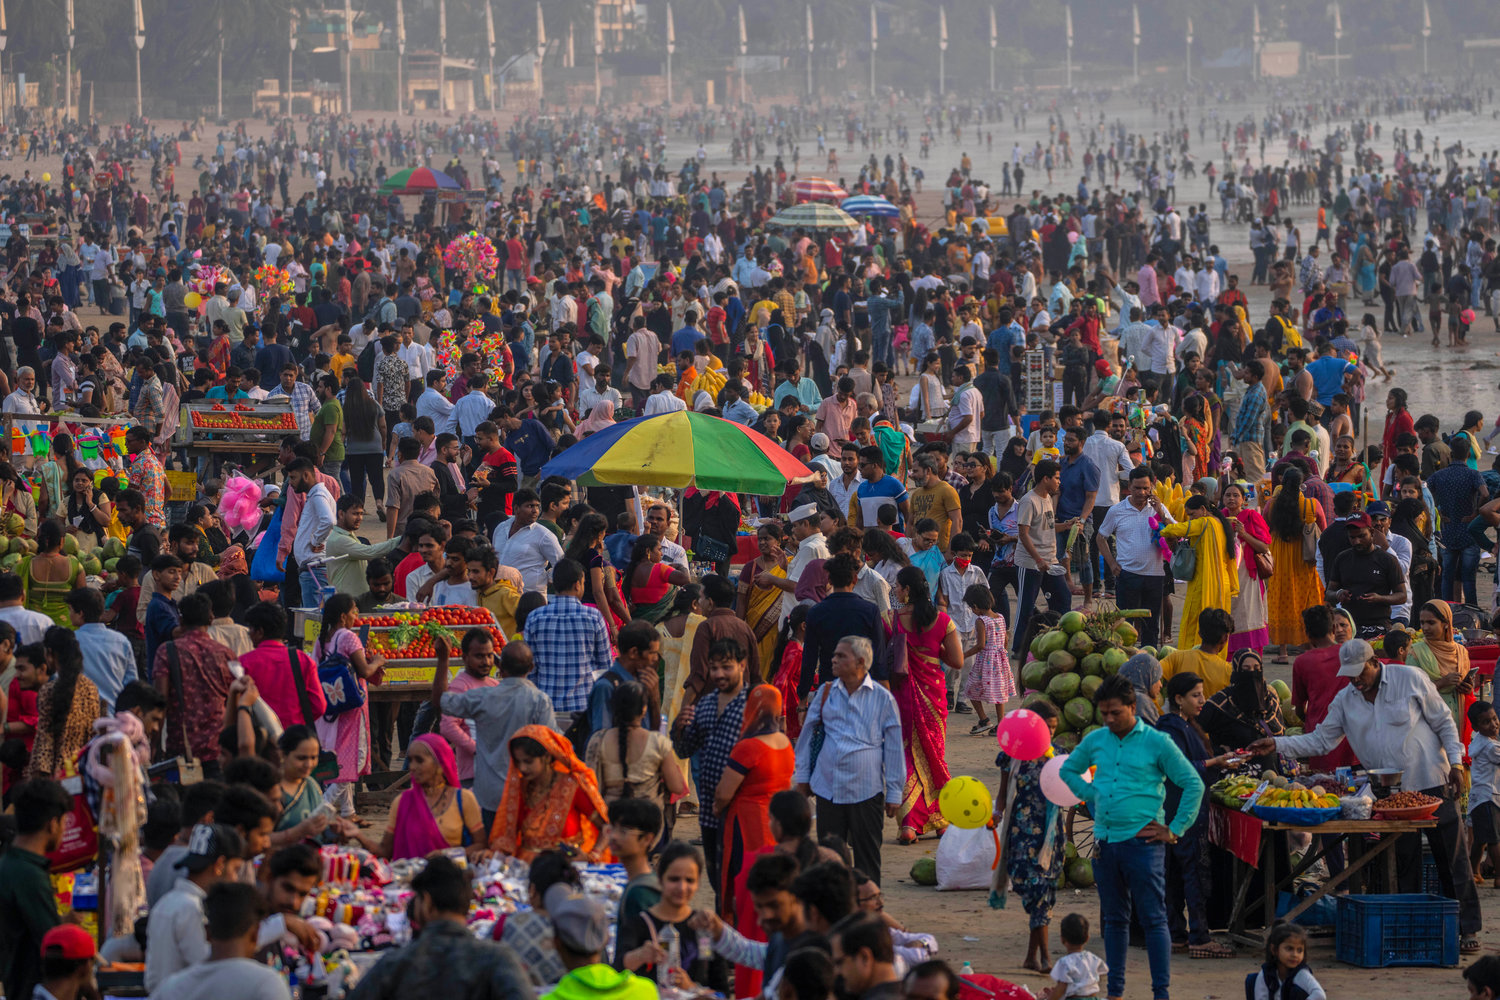 People crowd at the Juhu beach on the Arabian Sea coast in Mumbai, India, Sunday, Nov. 13, 2022. The 8 billionth baby on Earth is about to be born on a planet that is getting hotter. But experts in climate science and population both say the two issues aren't quite as connected as they seem. (AP Photo/Rafiq Maqbool)